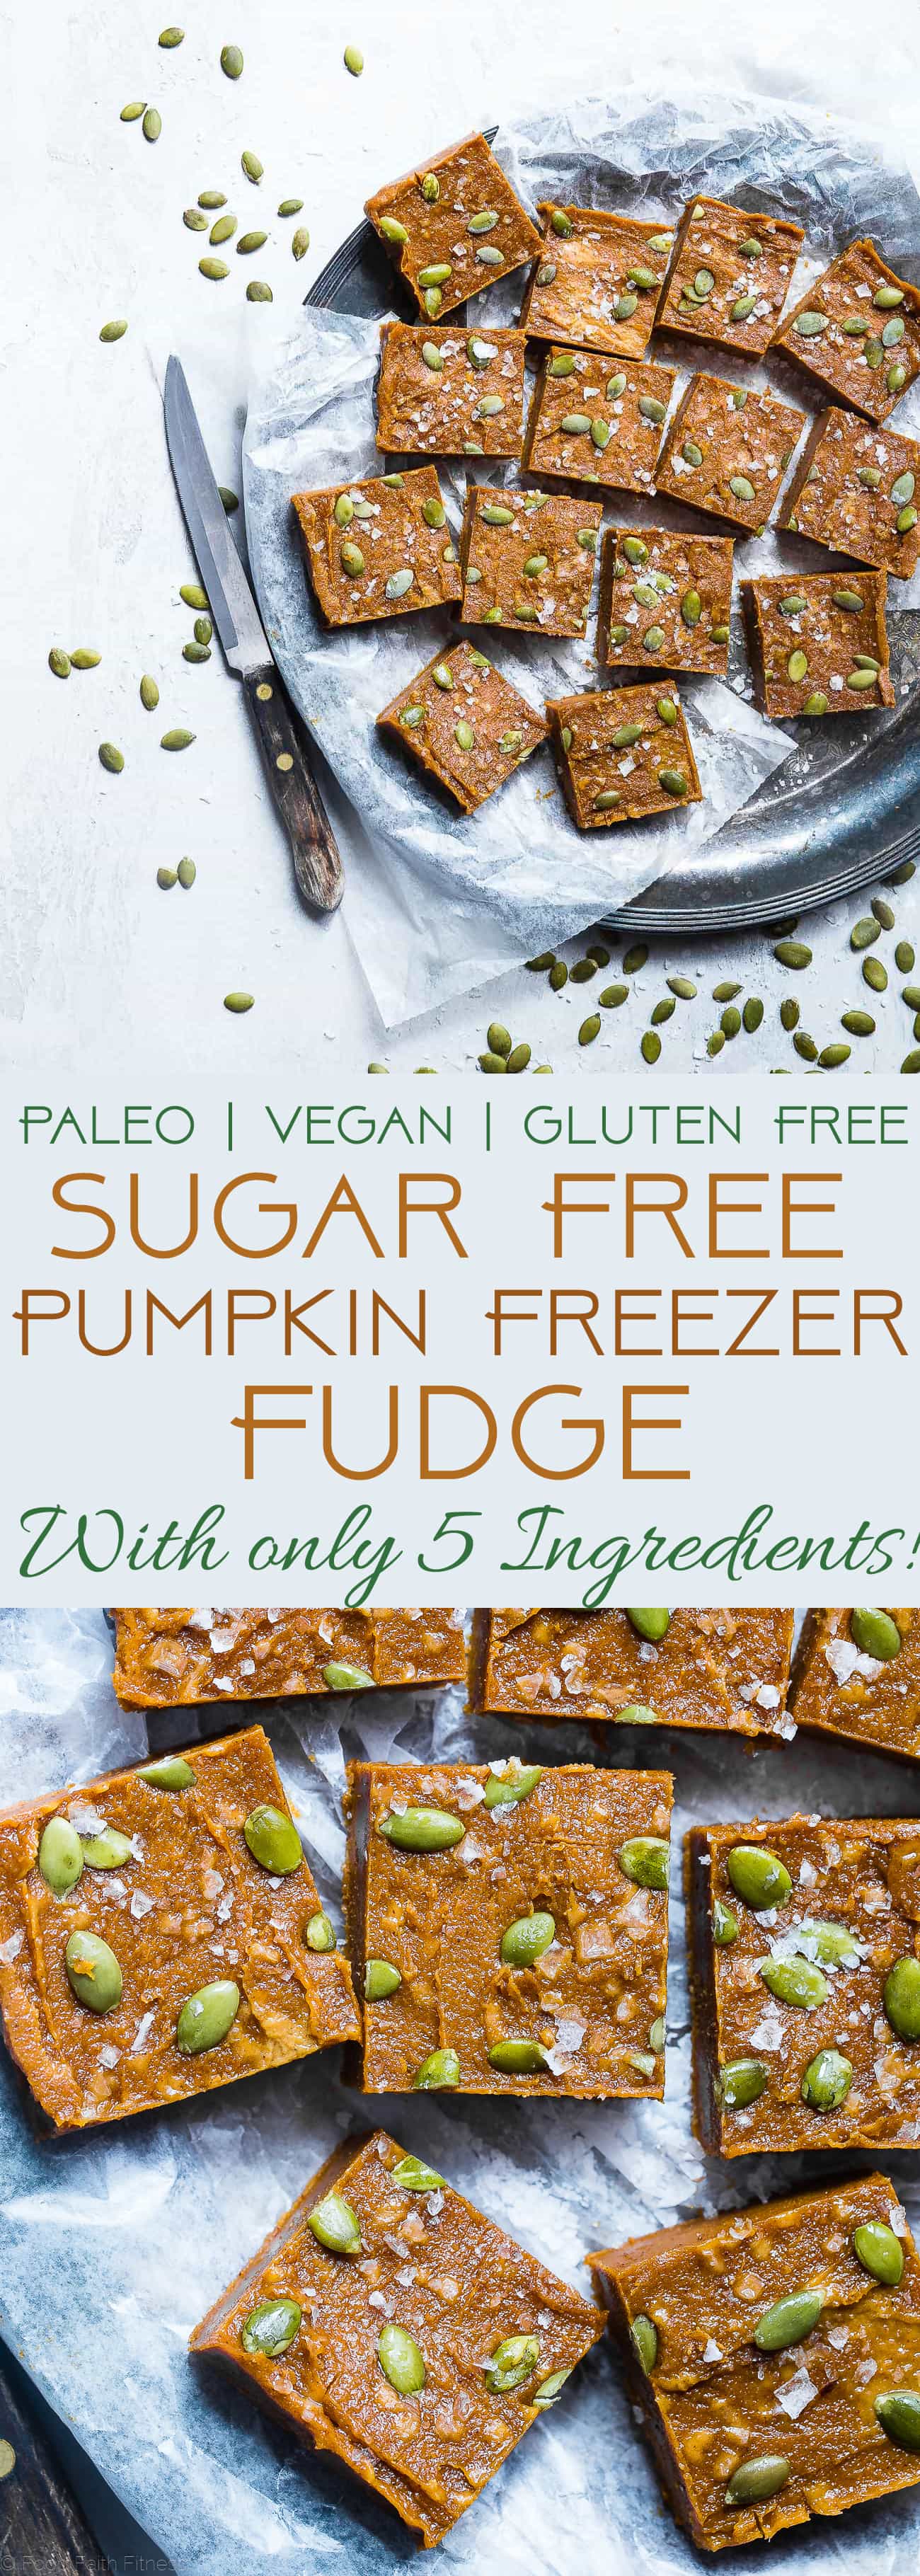 Sugar Free Vegan Pumpkin Freezer Fudge - This paleo, healthy pumpkin fudge requires only a few minutes to make and is naturally sweetened with dates! It's gluten, grain and dairy free and SO creamy! | Foodfaithfitness.com | @FoodFaithFit | Easy vegan fudge. healthy vegan fudge. healthy fudge. vegan fudge with dates. sugar free fudge. vegan pumpkin fudge. paleo pumpkin fudge. gluten free pumpkin fudge. no bake pumpkin fudge. quick pumpkin fudge.